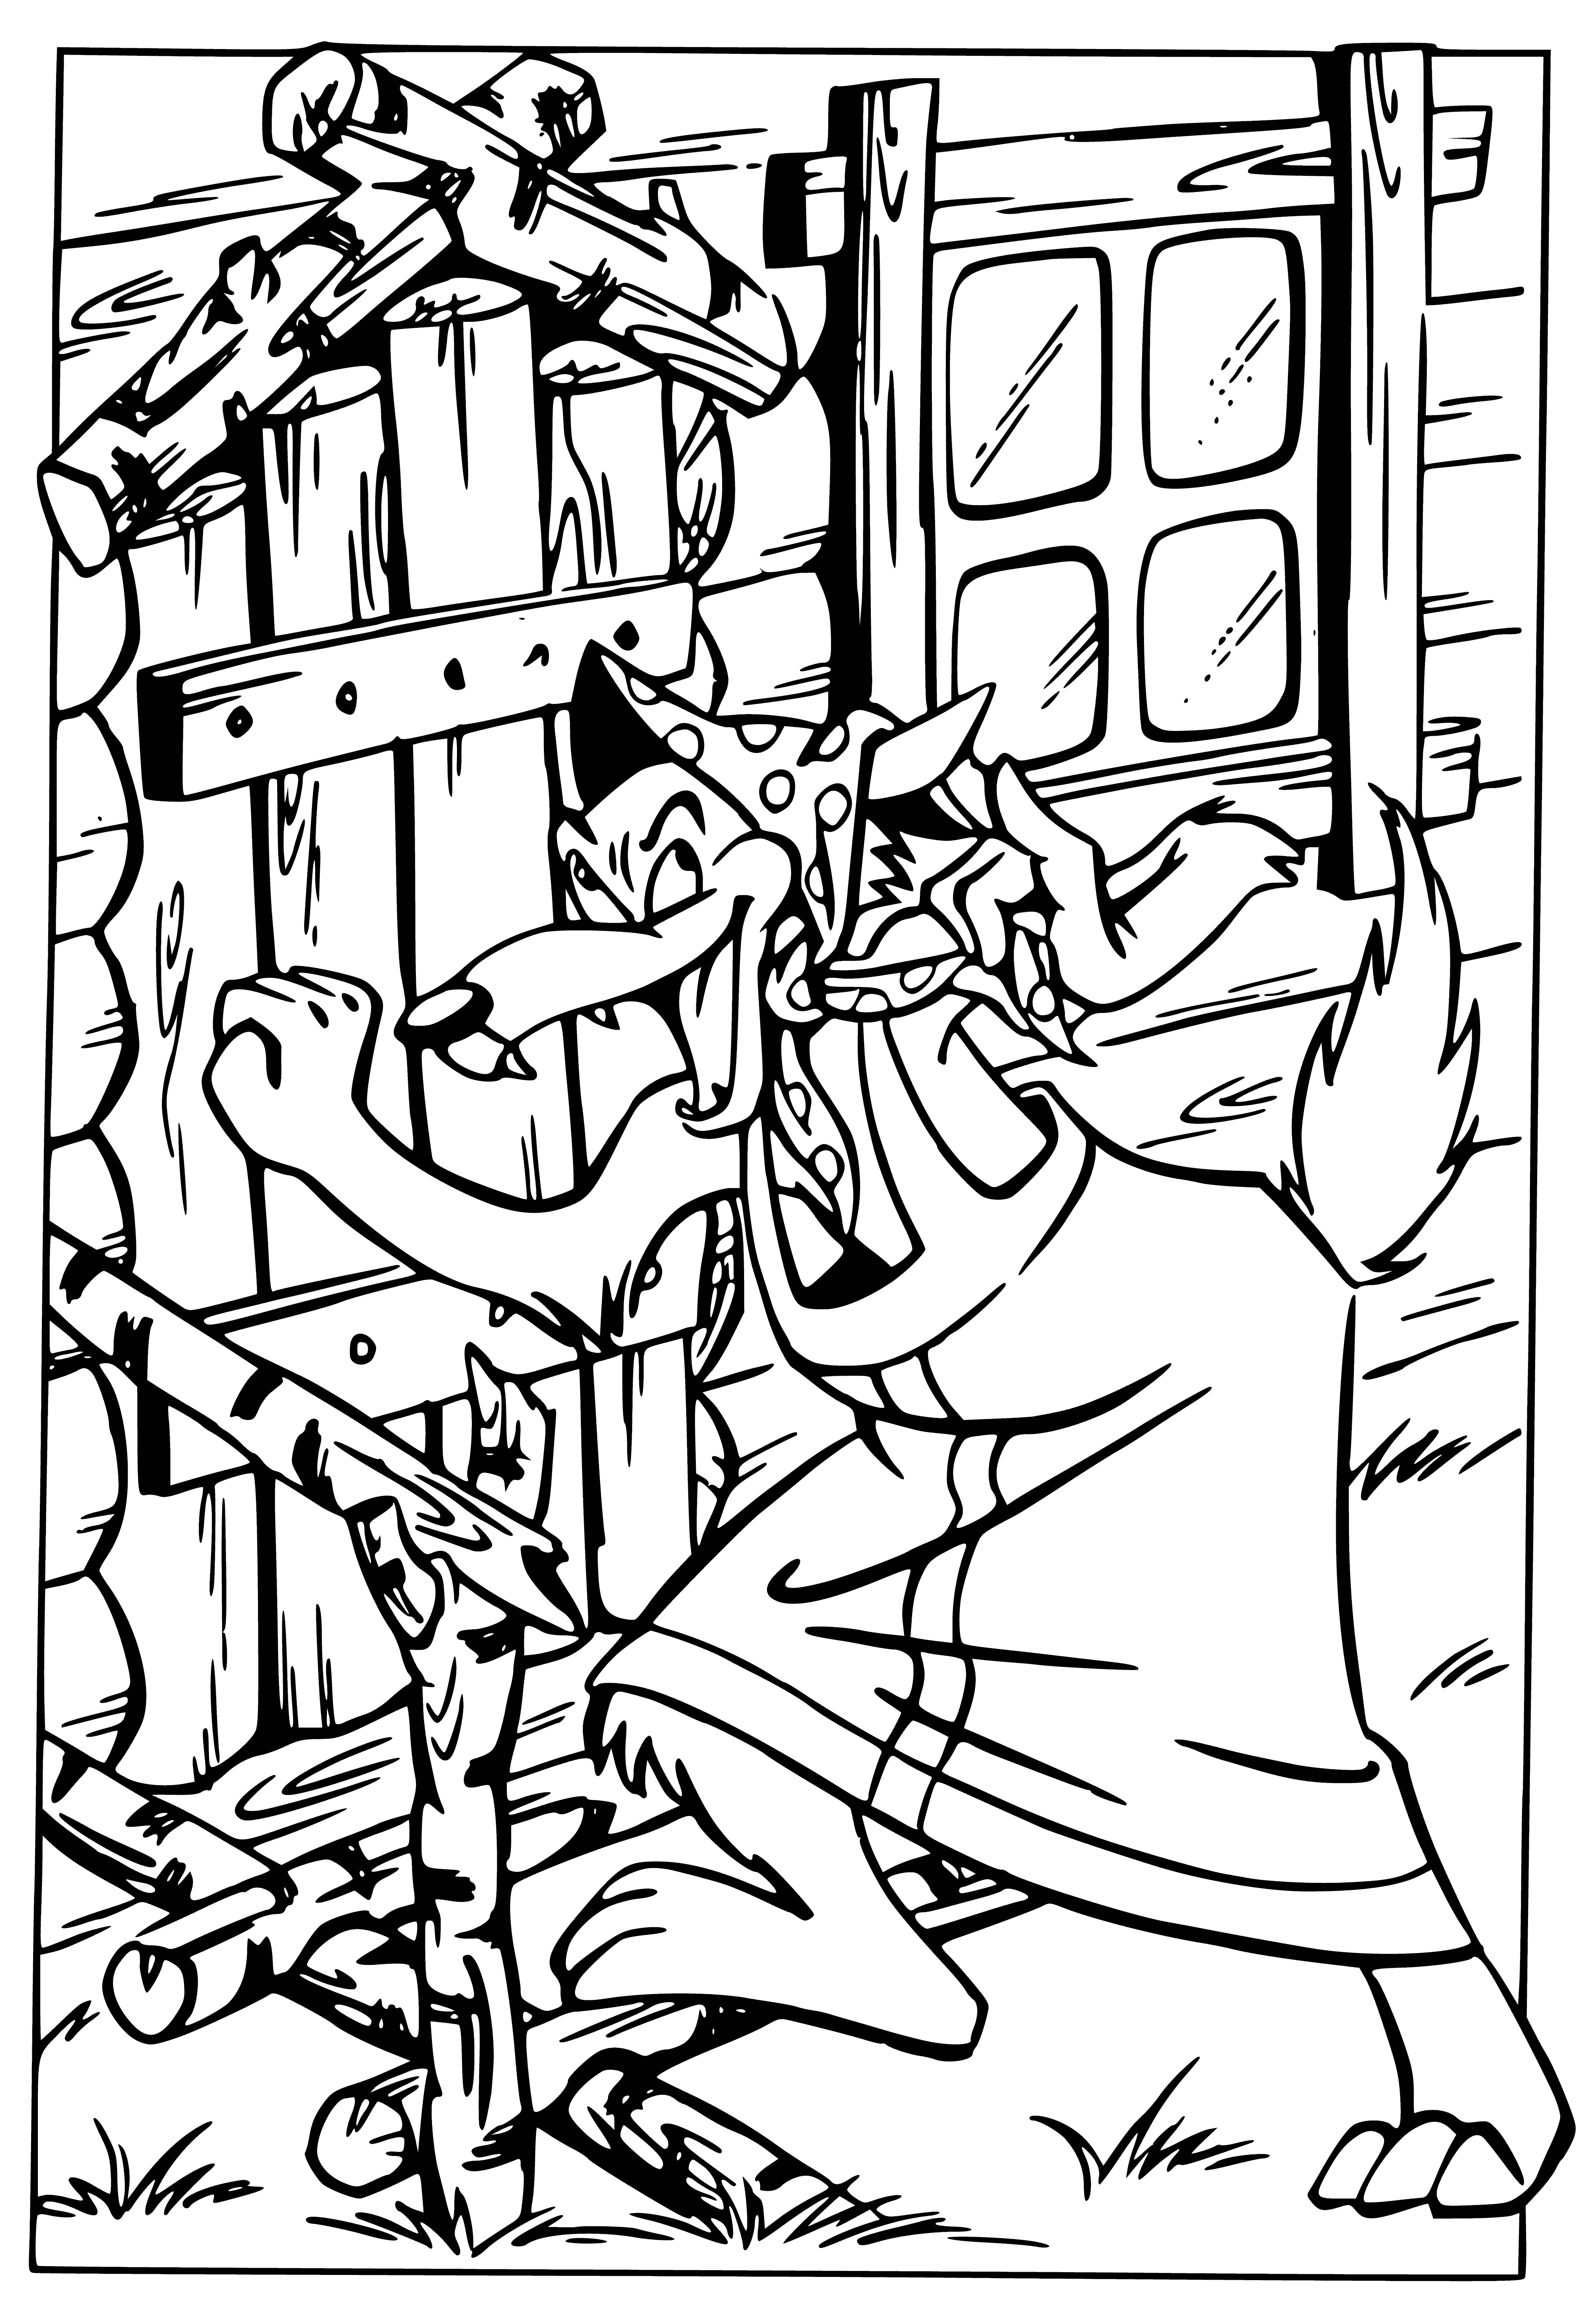 coloring page: Woman in hut holds knife, terrified. Wolf looks at her hungrily; woman trapped and helpless.